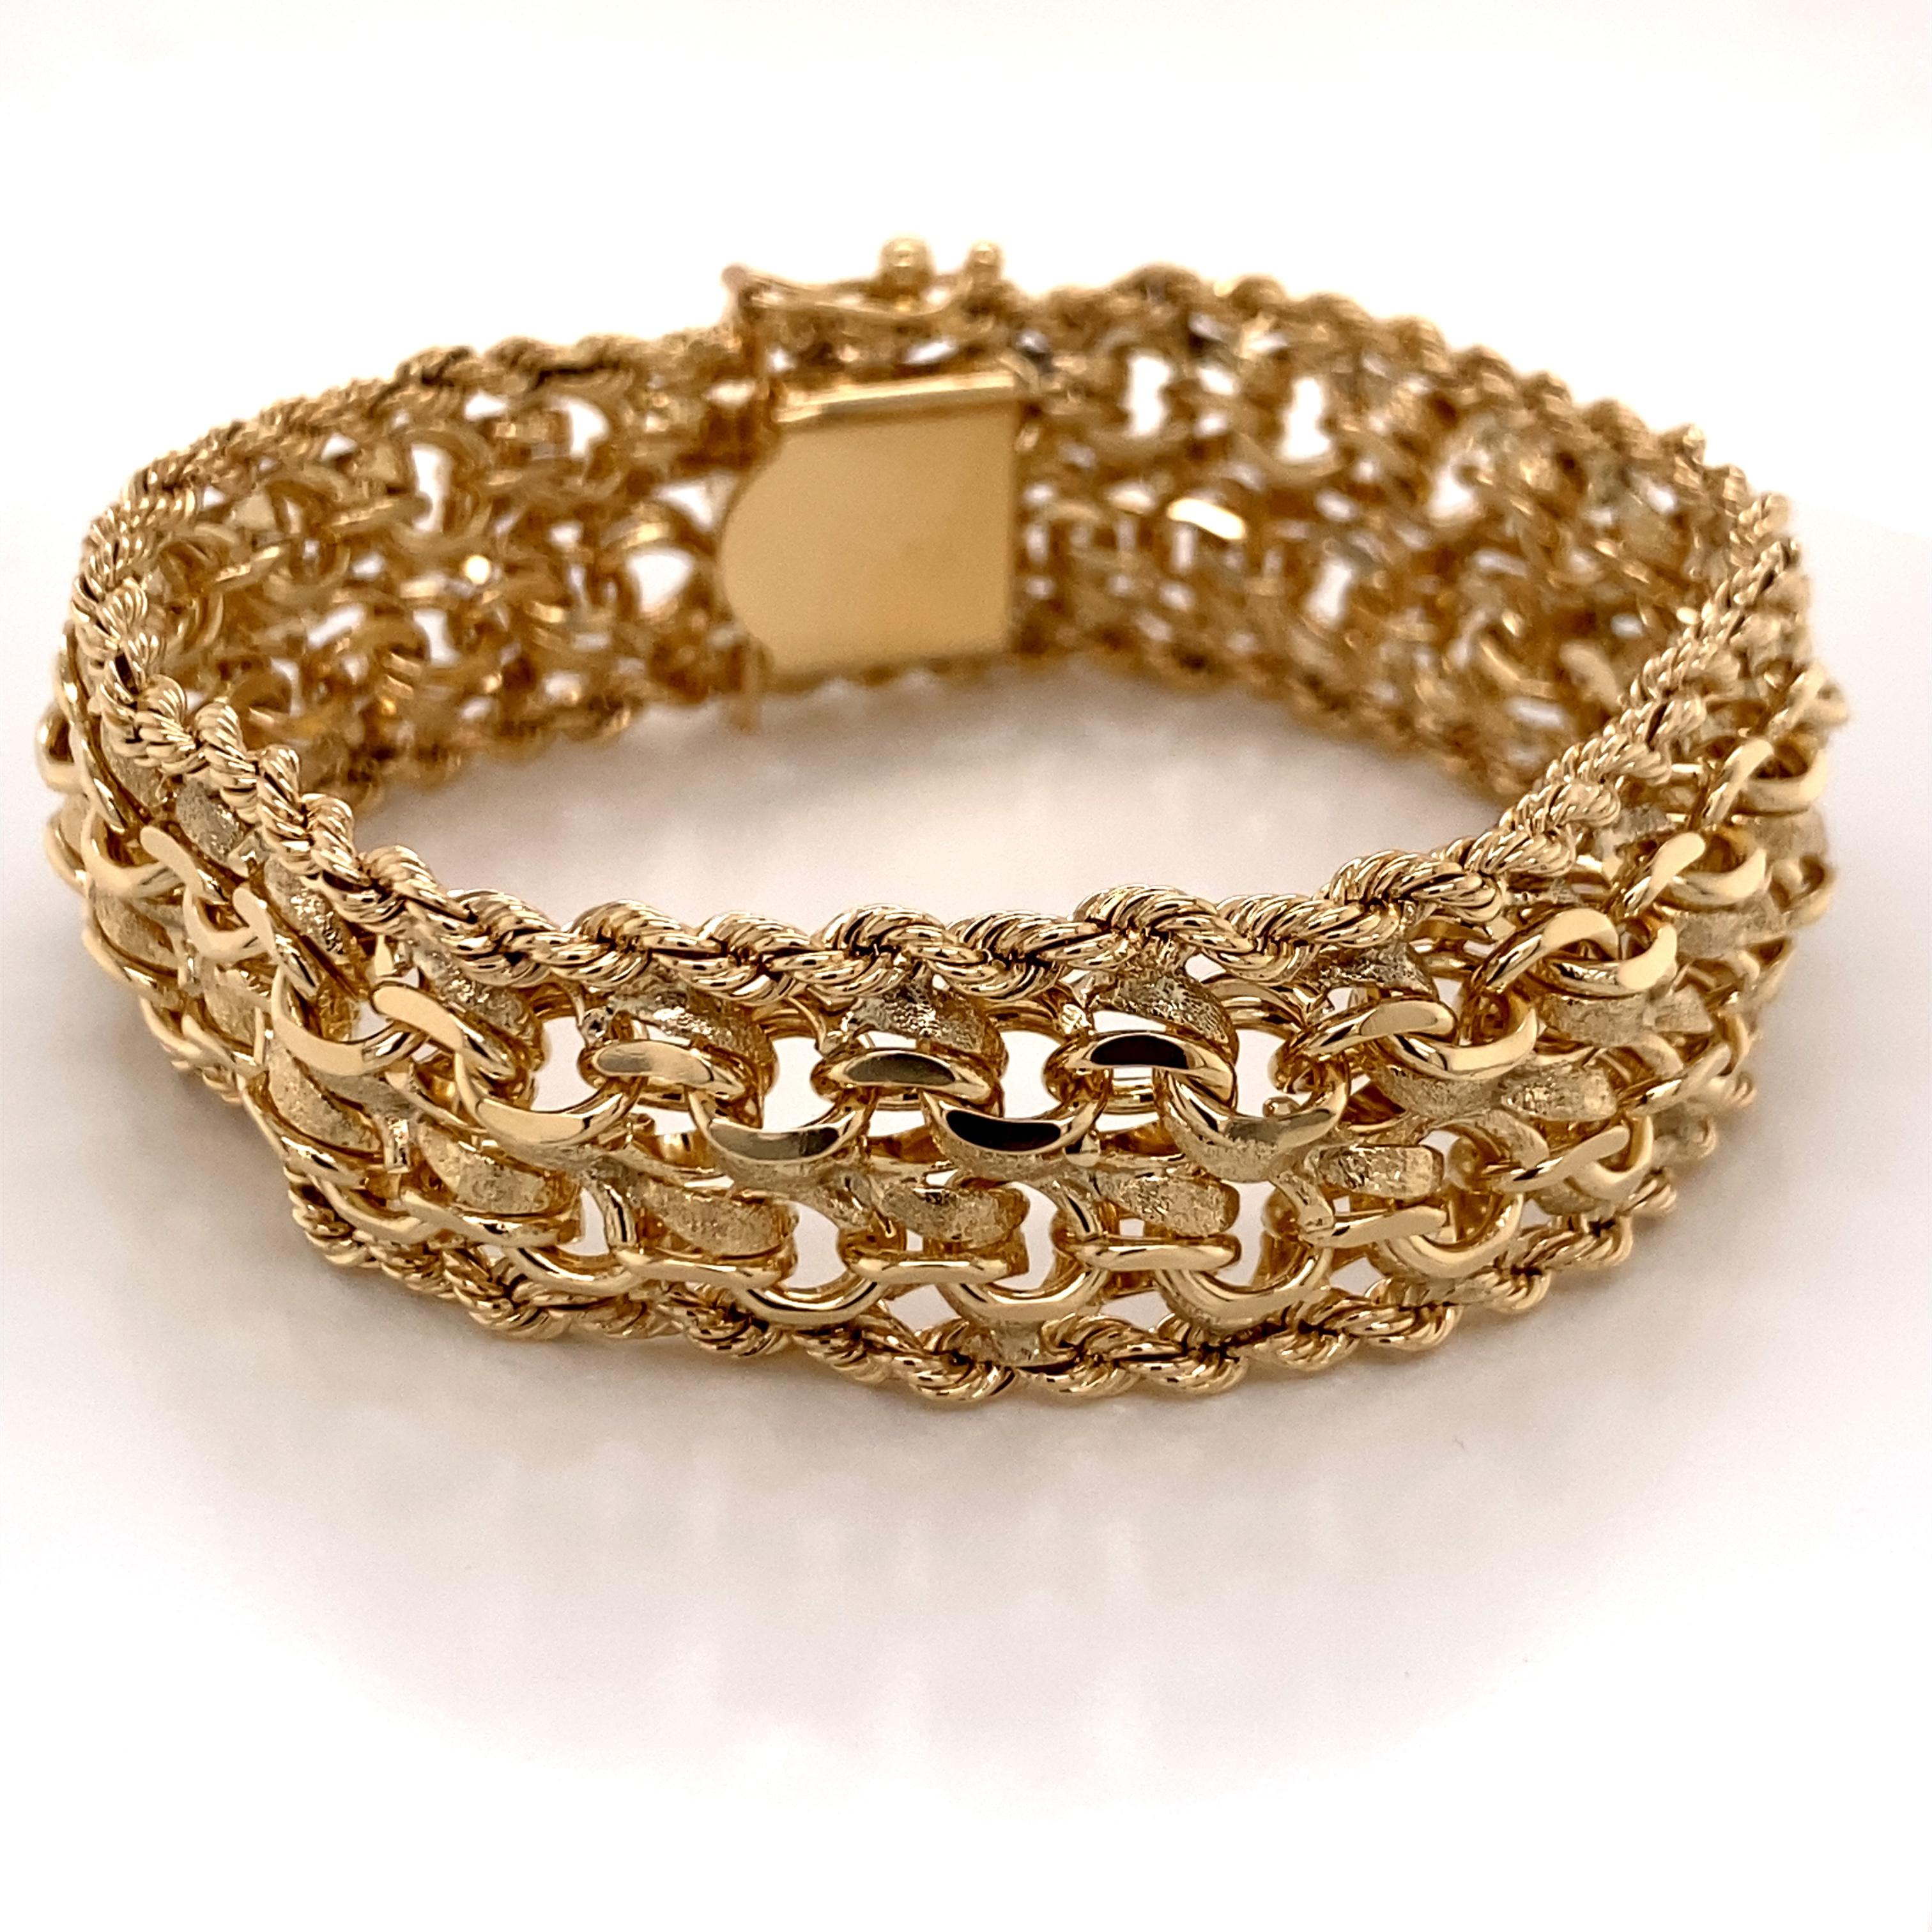 Retro 1960s 14 Karat Yellow Gold Wide Charm Bracelet with Rope Edge For Sale